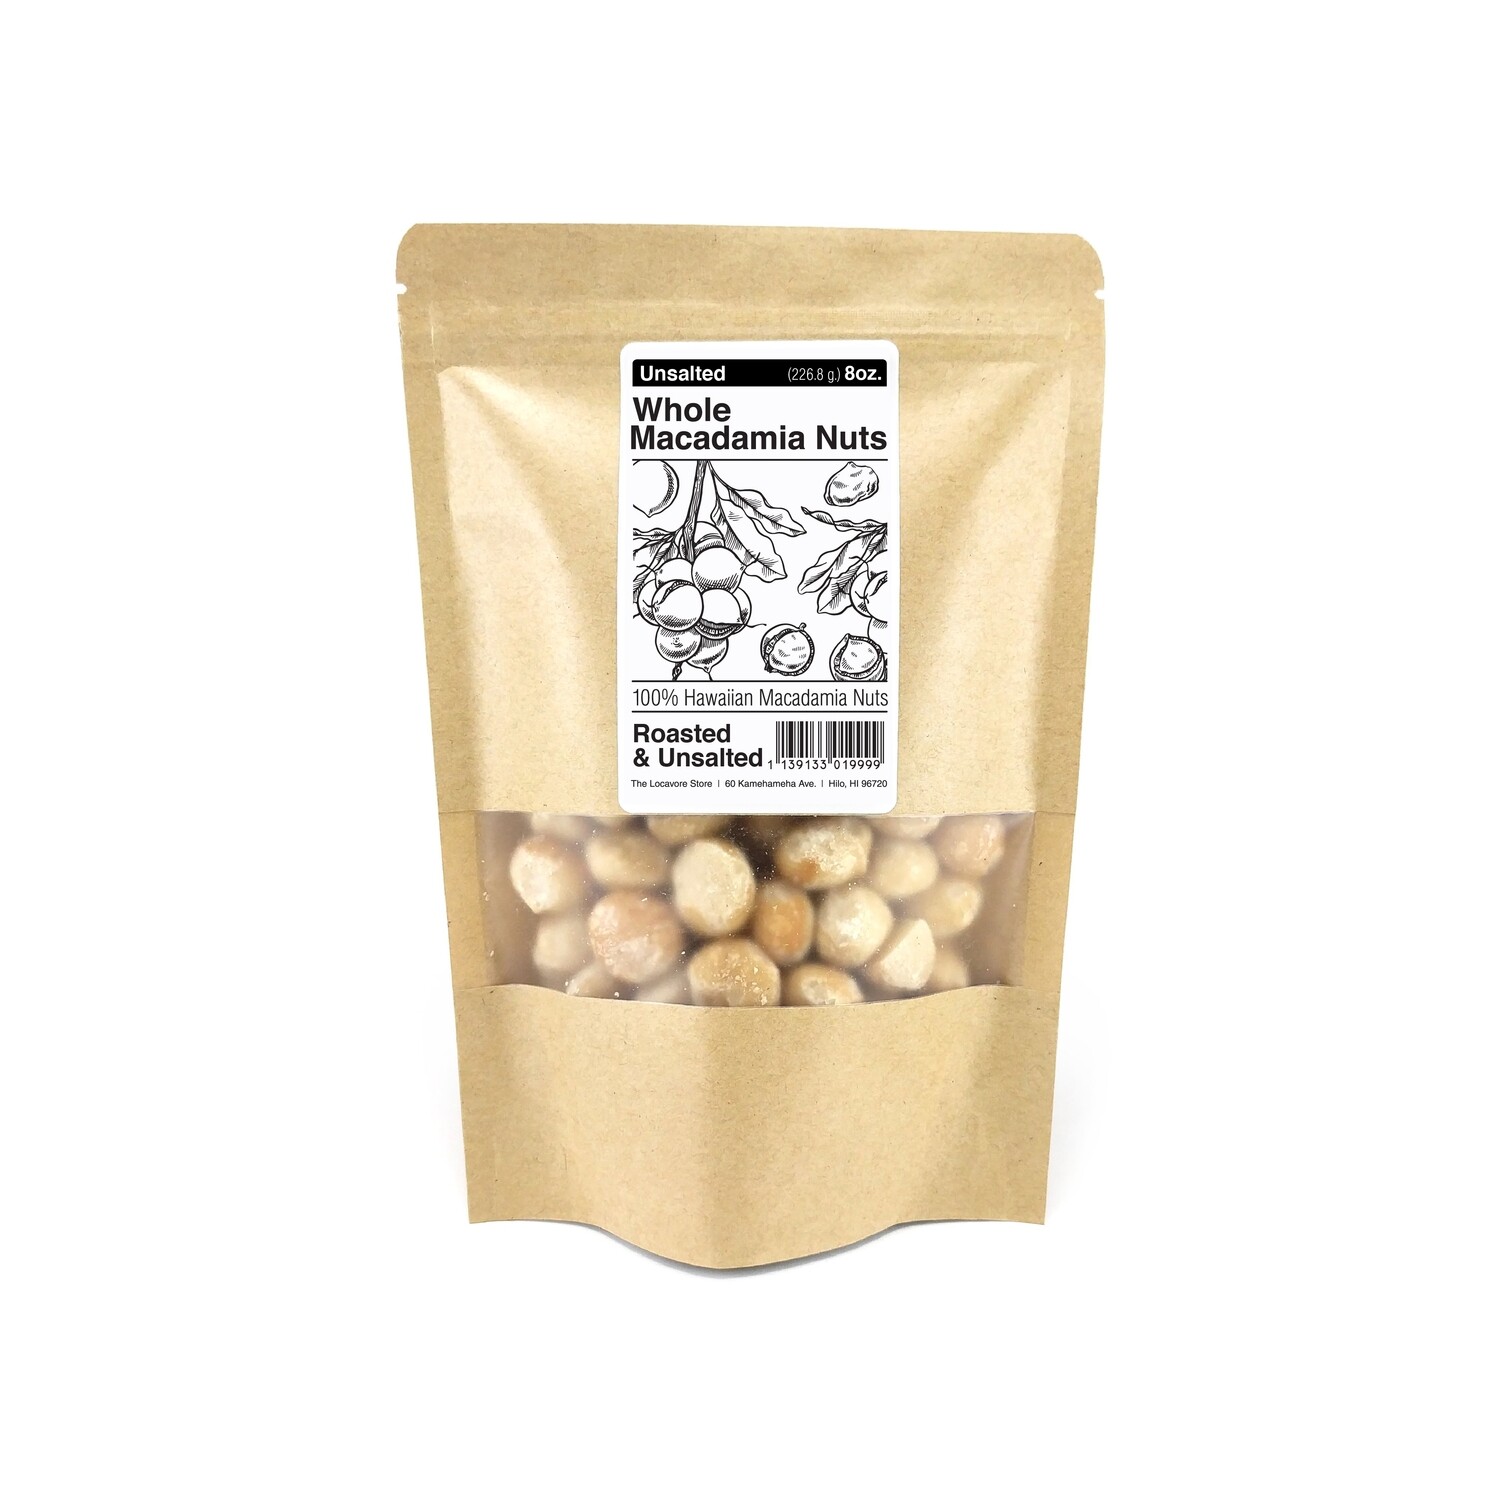 Macadamia Nuts, The Locavore Store - Unsalted (8 Oz.)